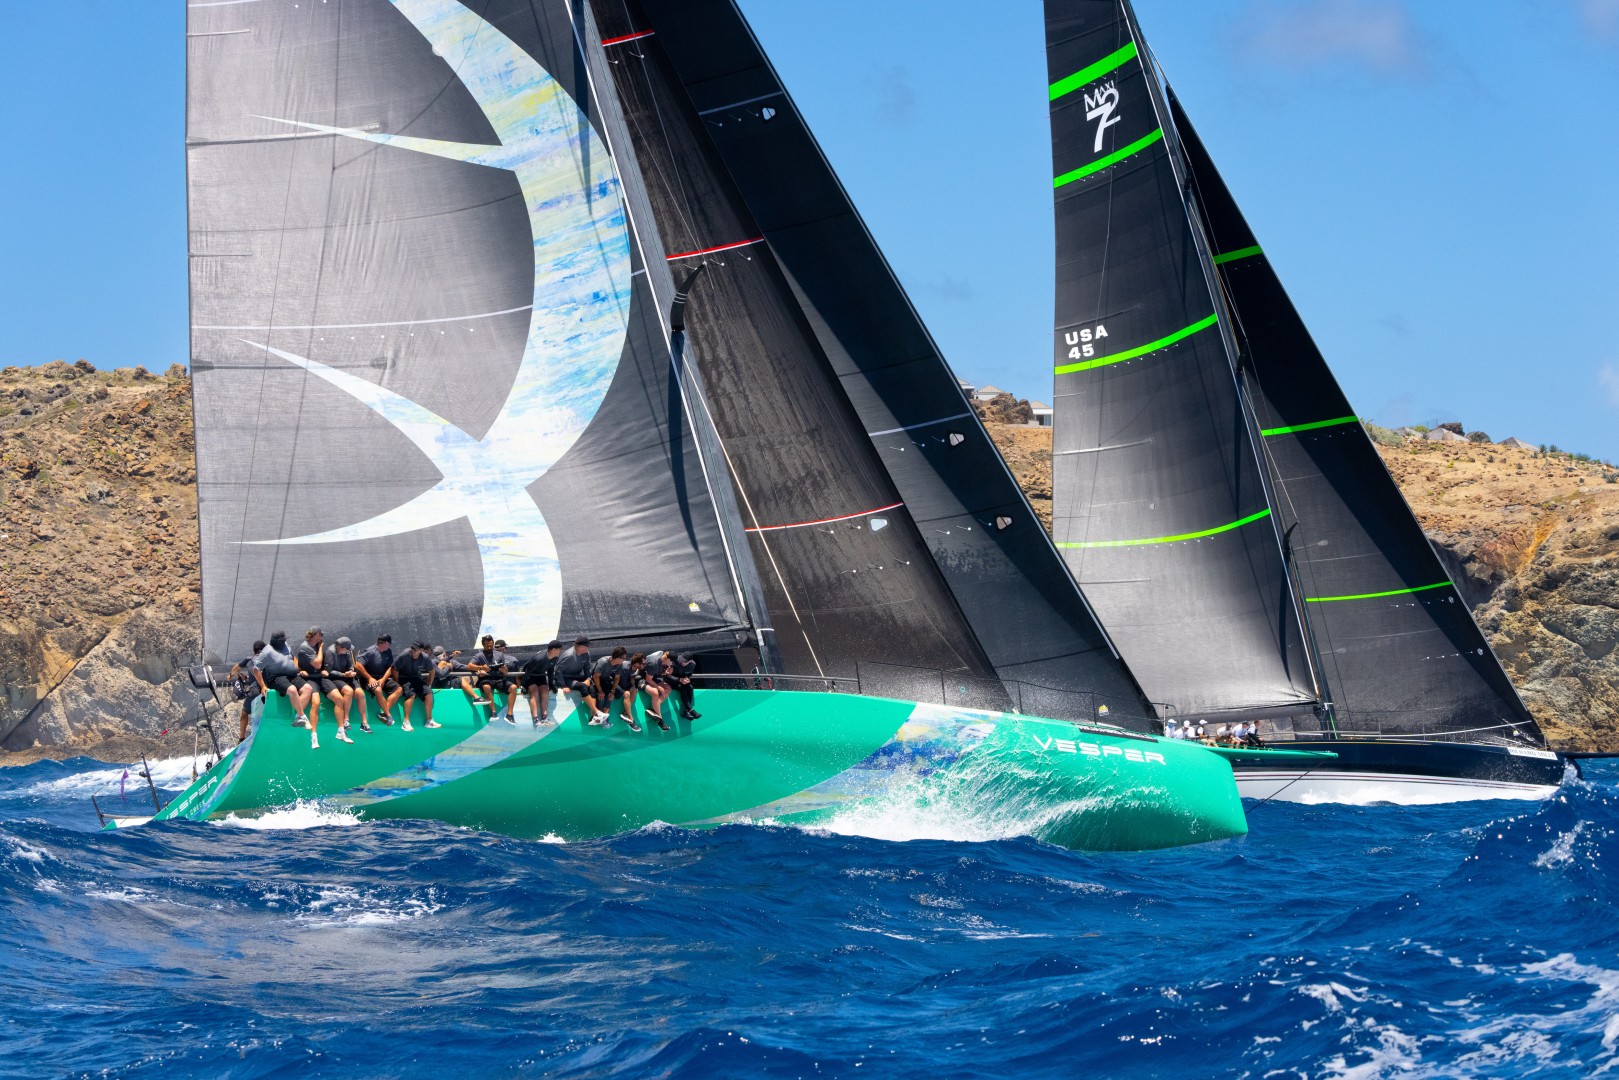 Tight racing between Vesper and Bella Mente on day three of Les Voiles de St Barth Richard Mille.
Photo: Christophe Jouany.